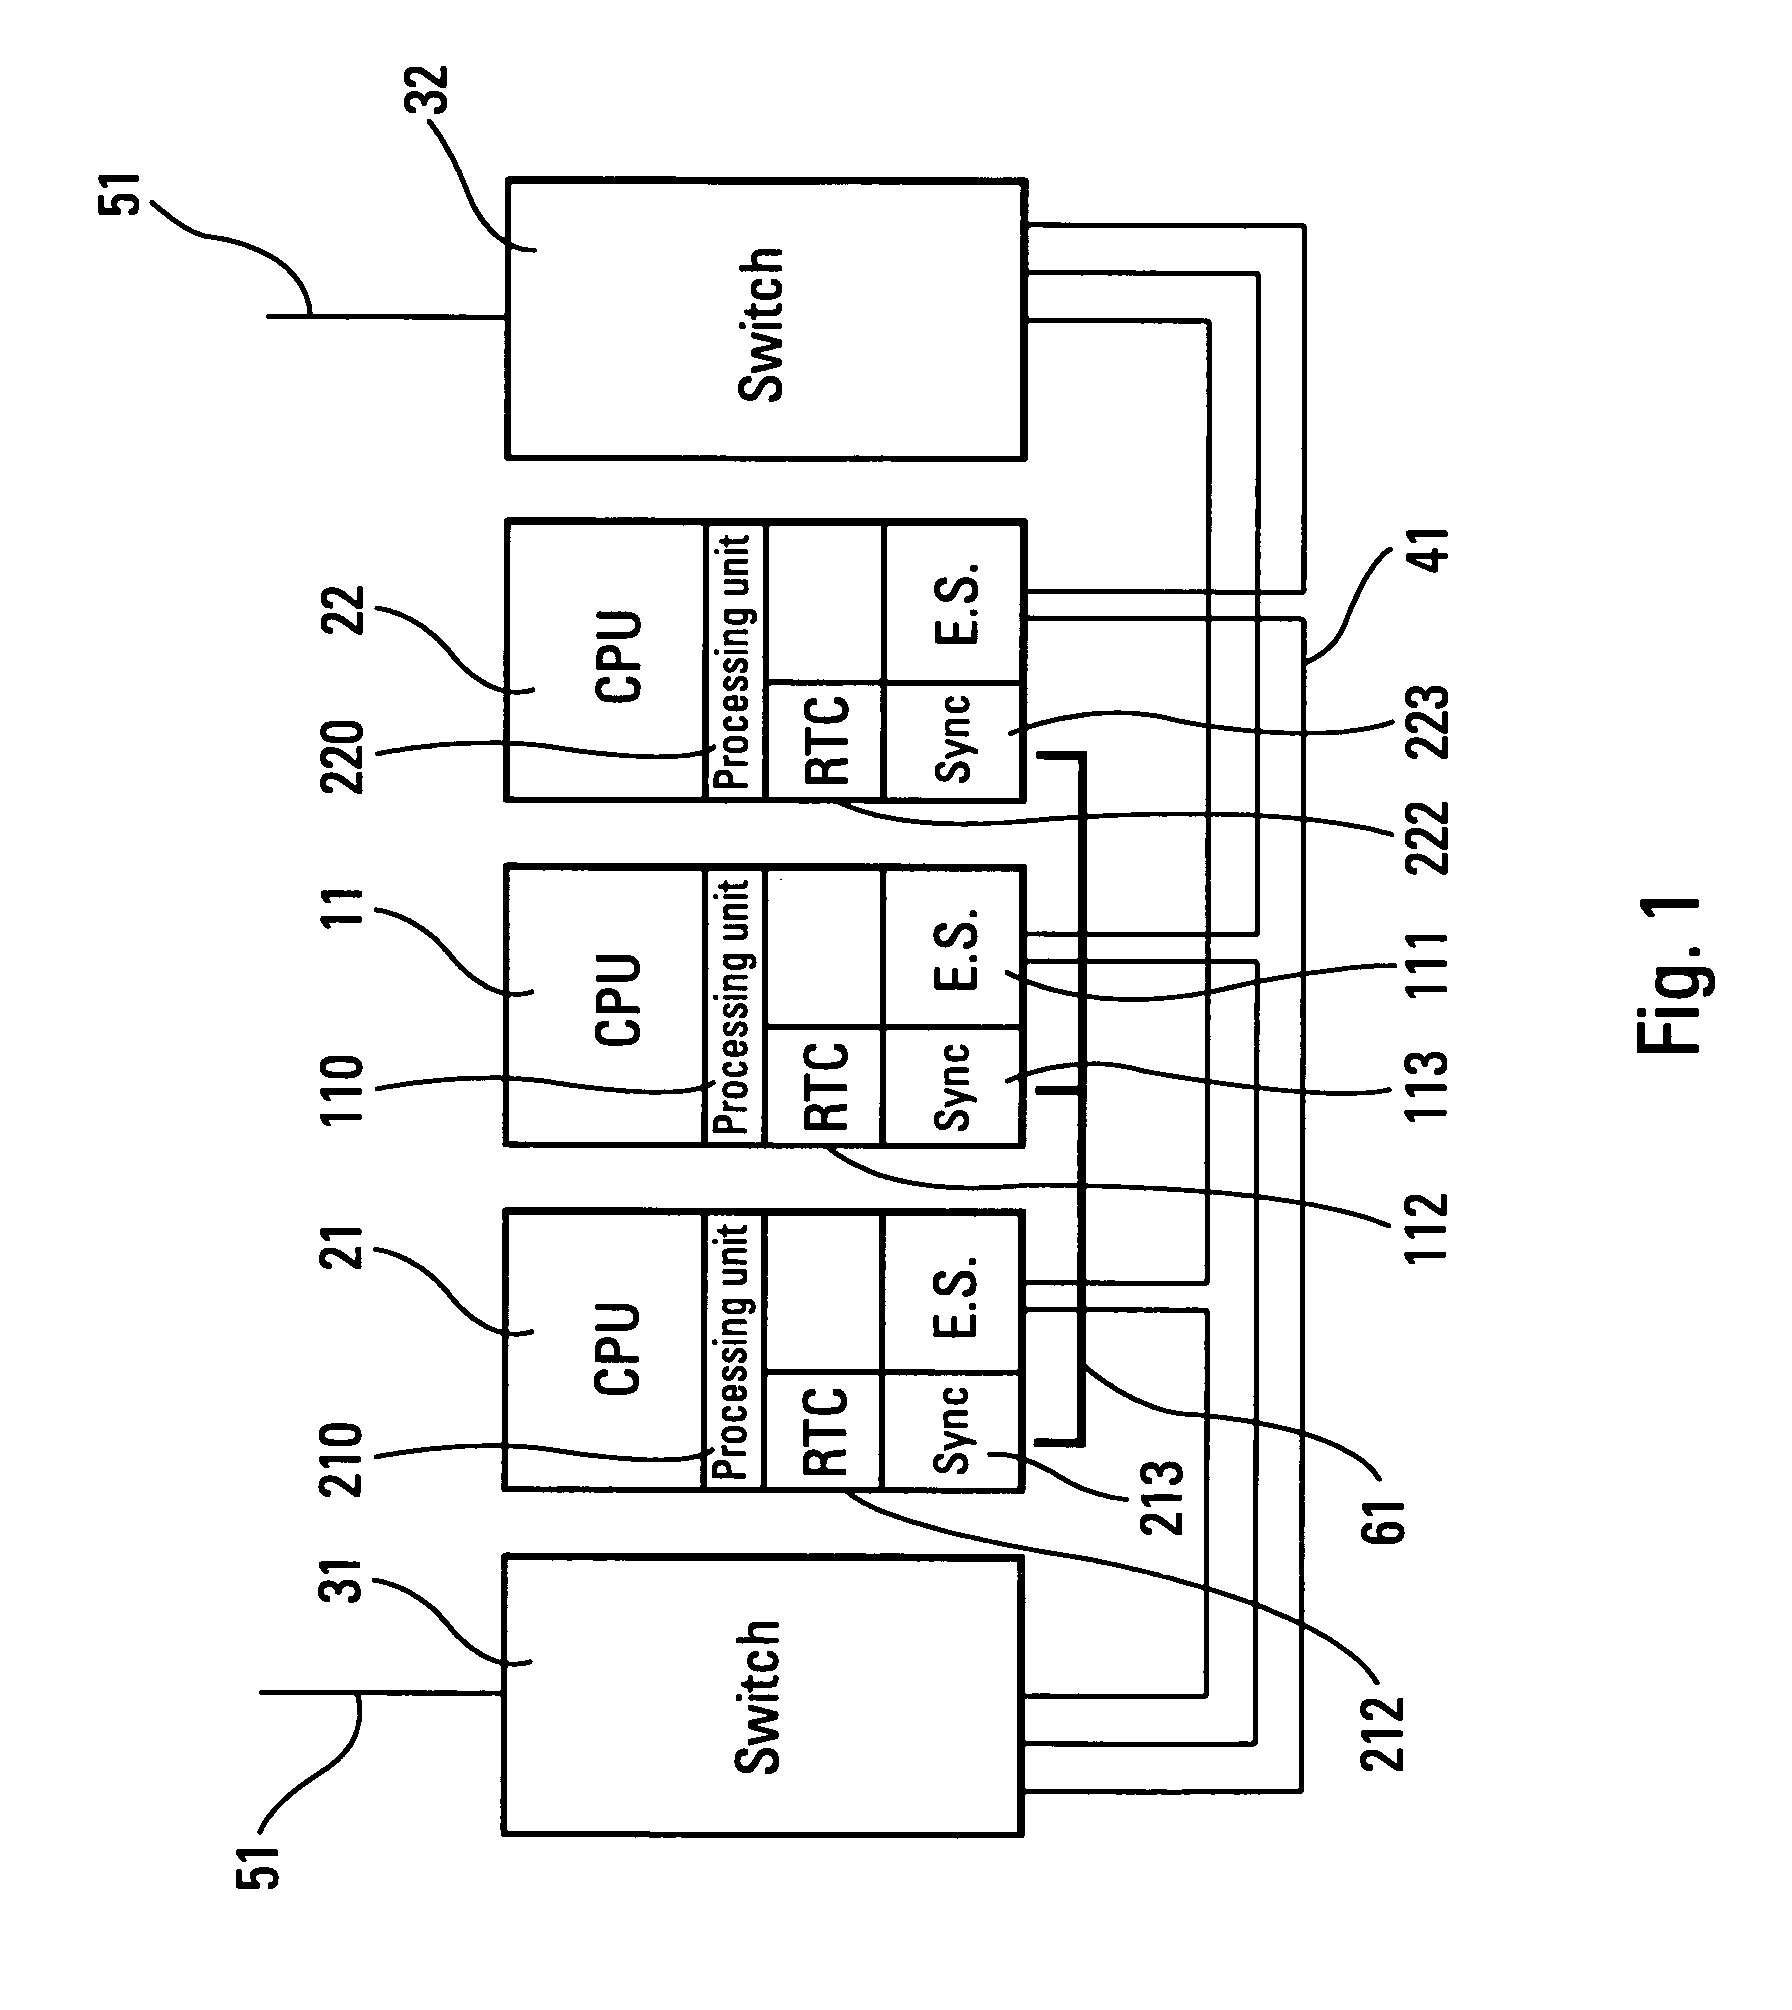 Fault-tolerant synchronisation device for a real-time computer network